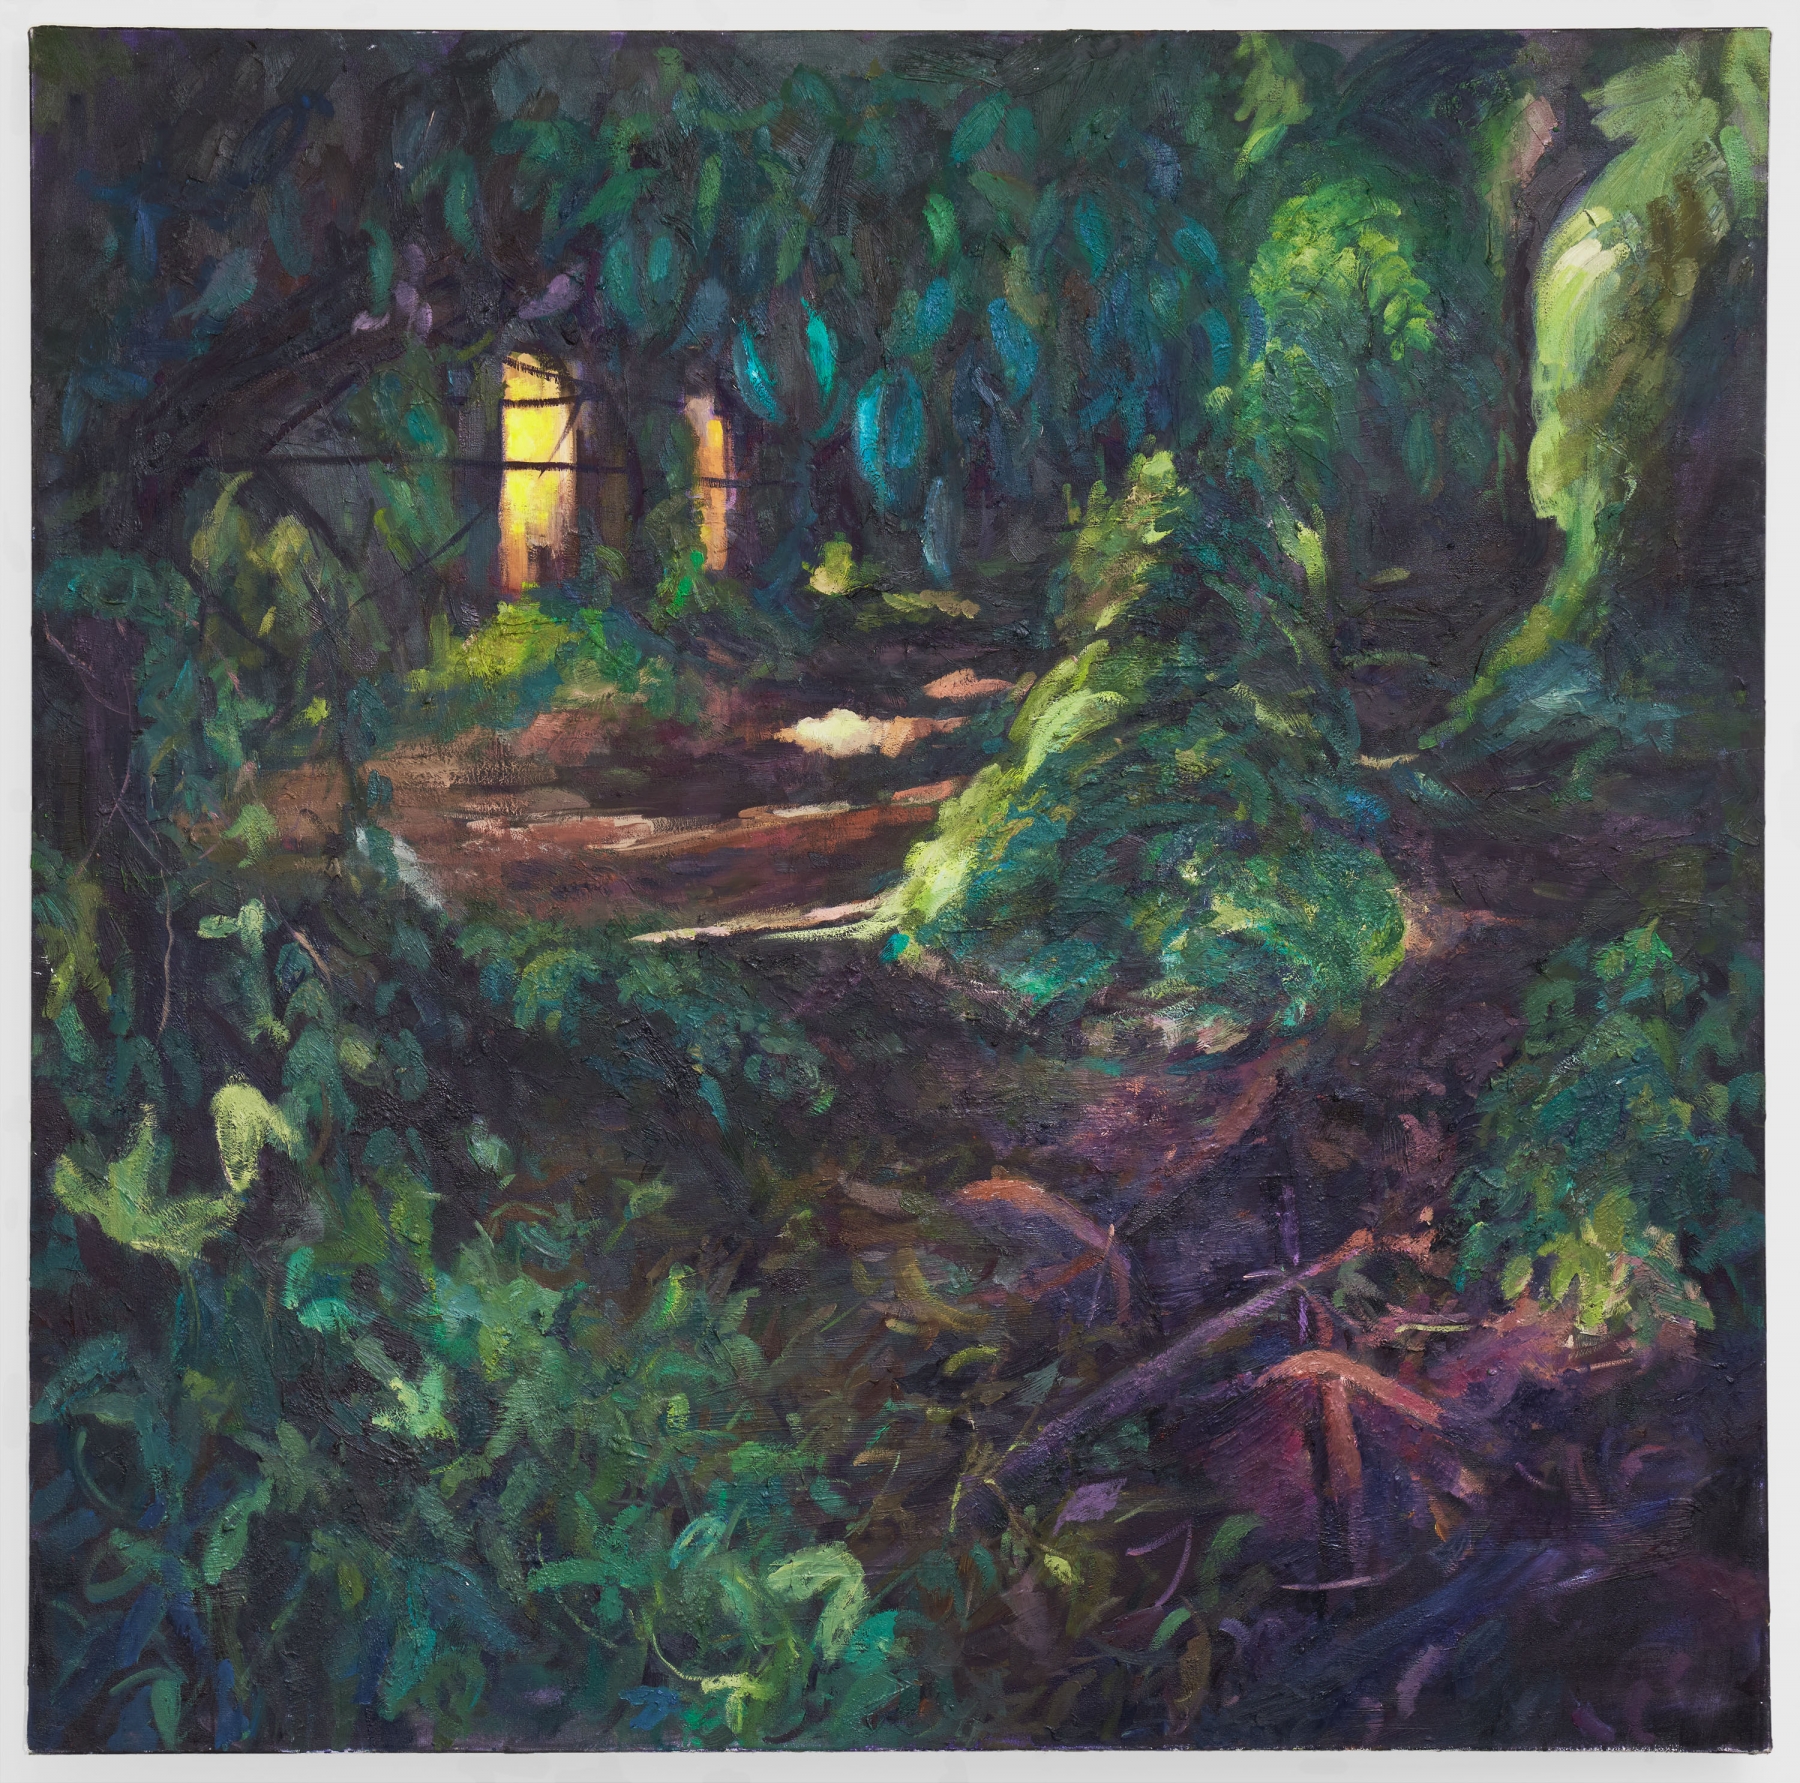 Cabin in the Woods, 2019

Oil on canvas&amp;nbsp;

152.4 x 152.4 cm / 60 x 60 in.

Enquire